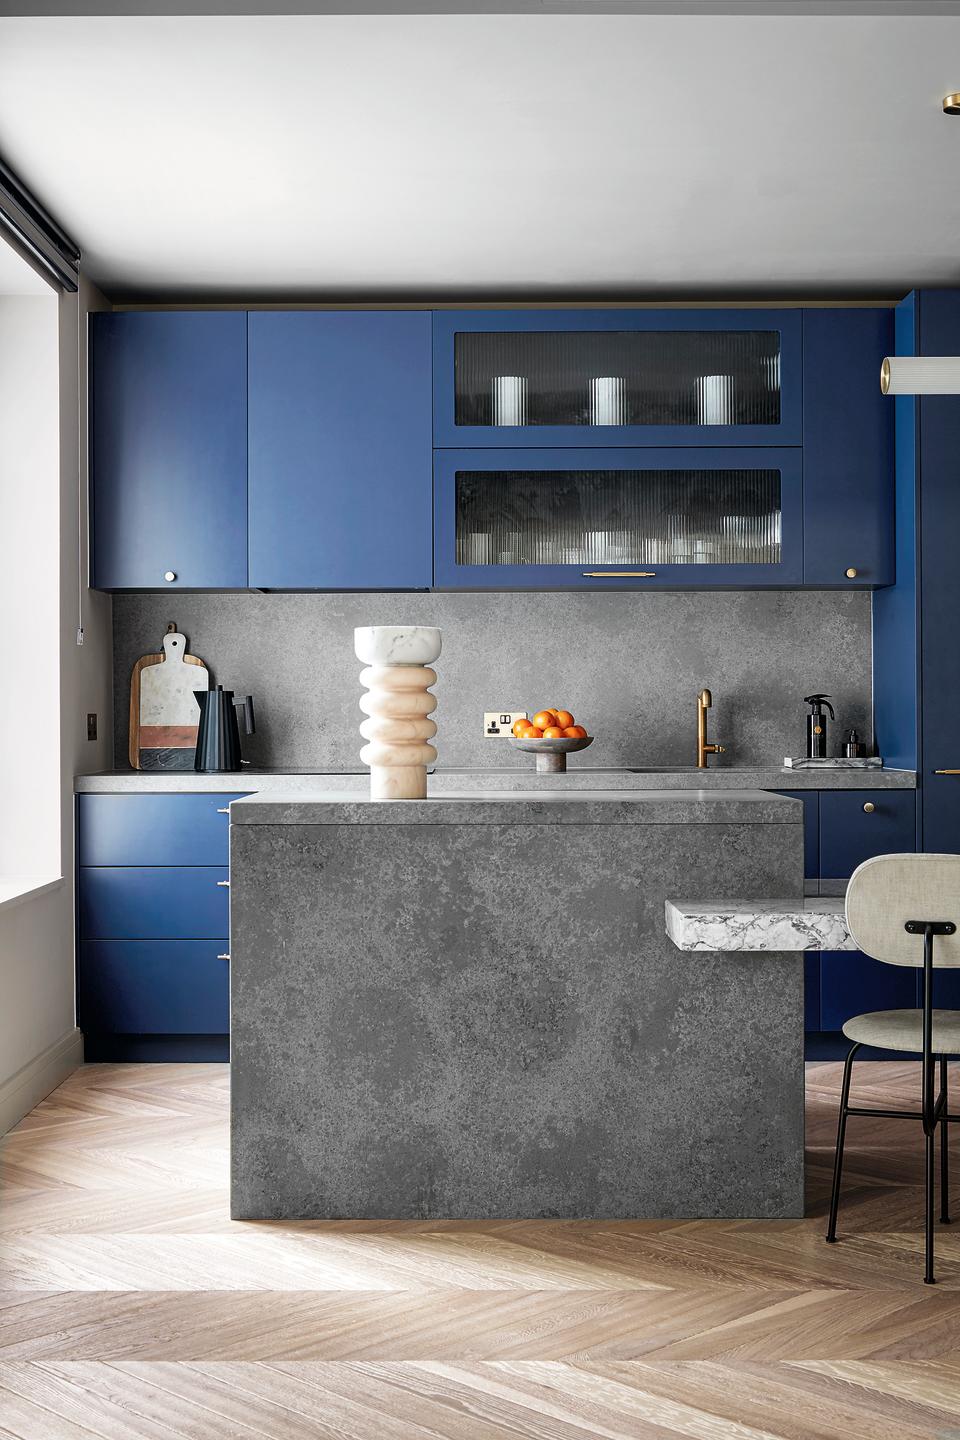 A kitchen with blue cabinetry and a grey stone island